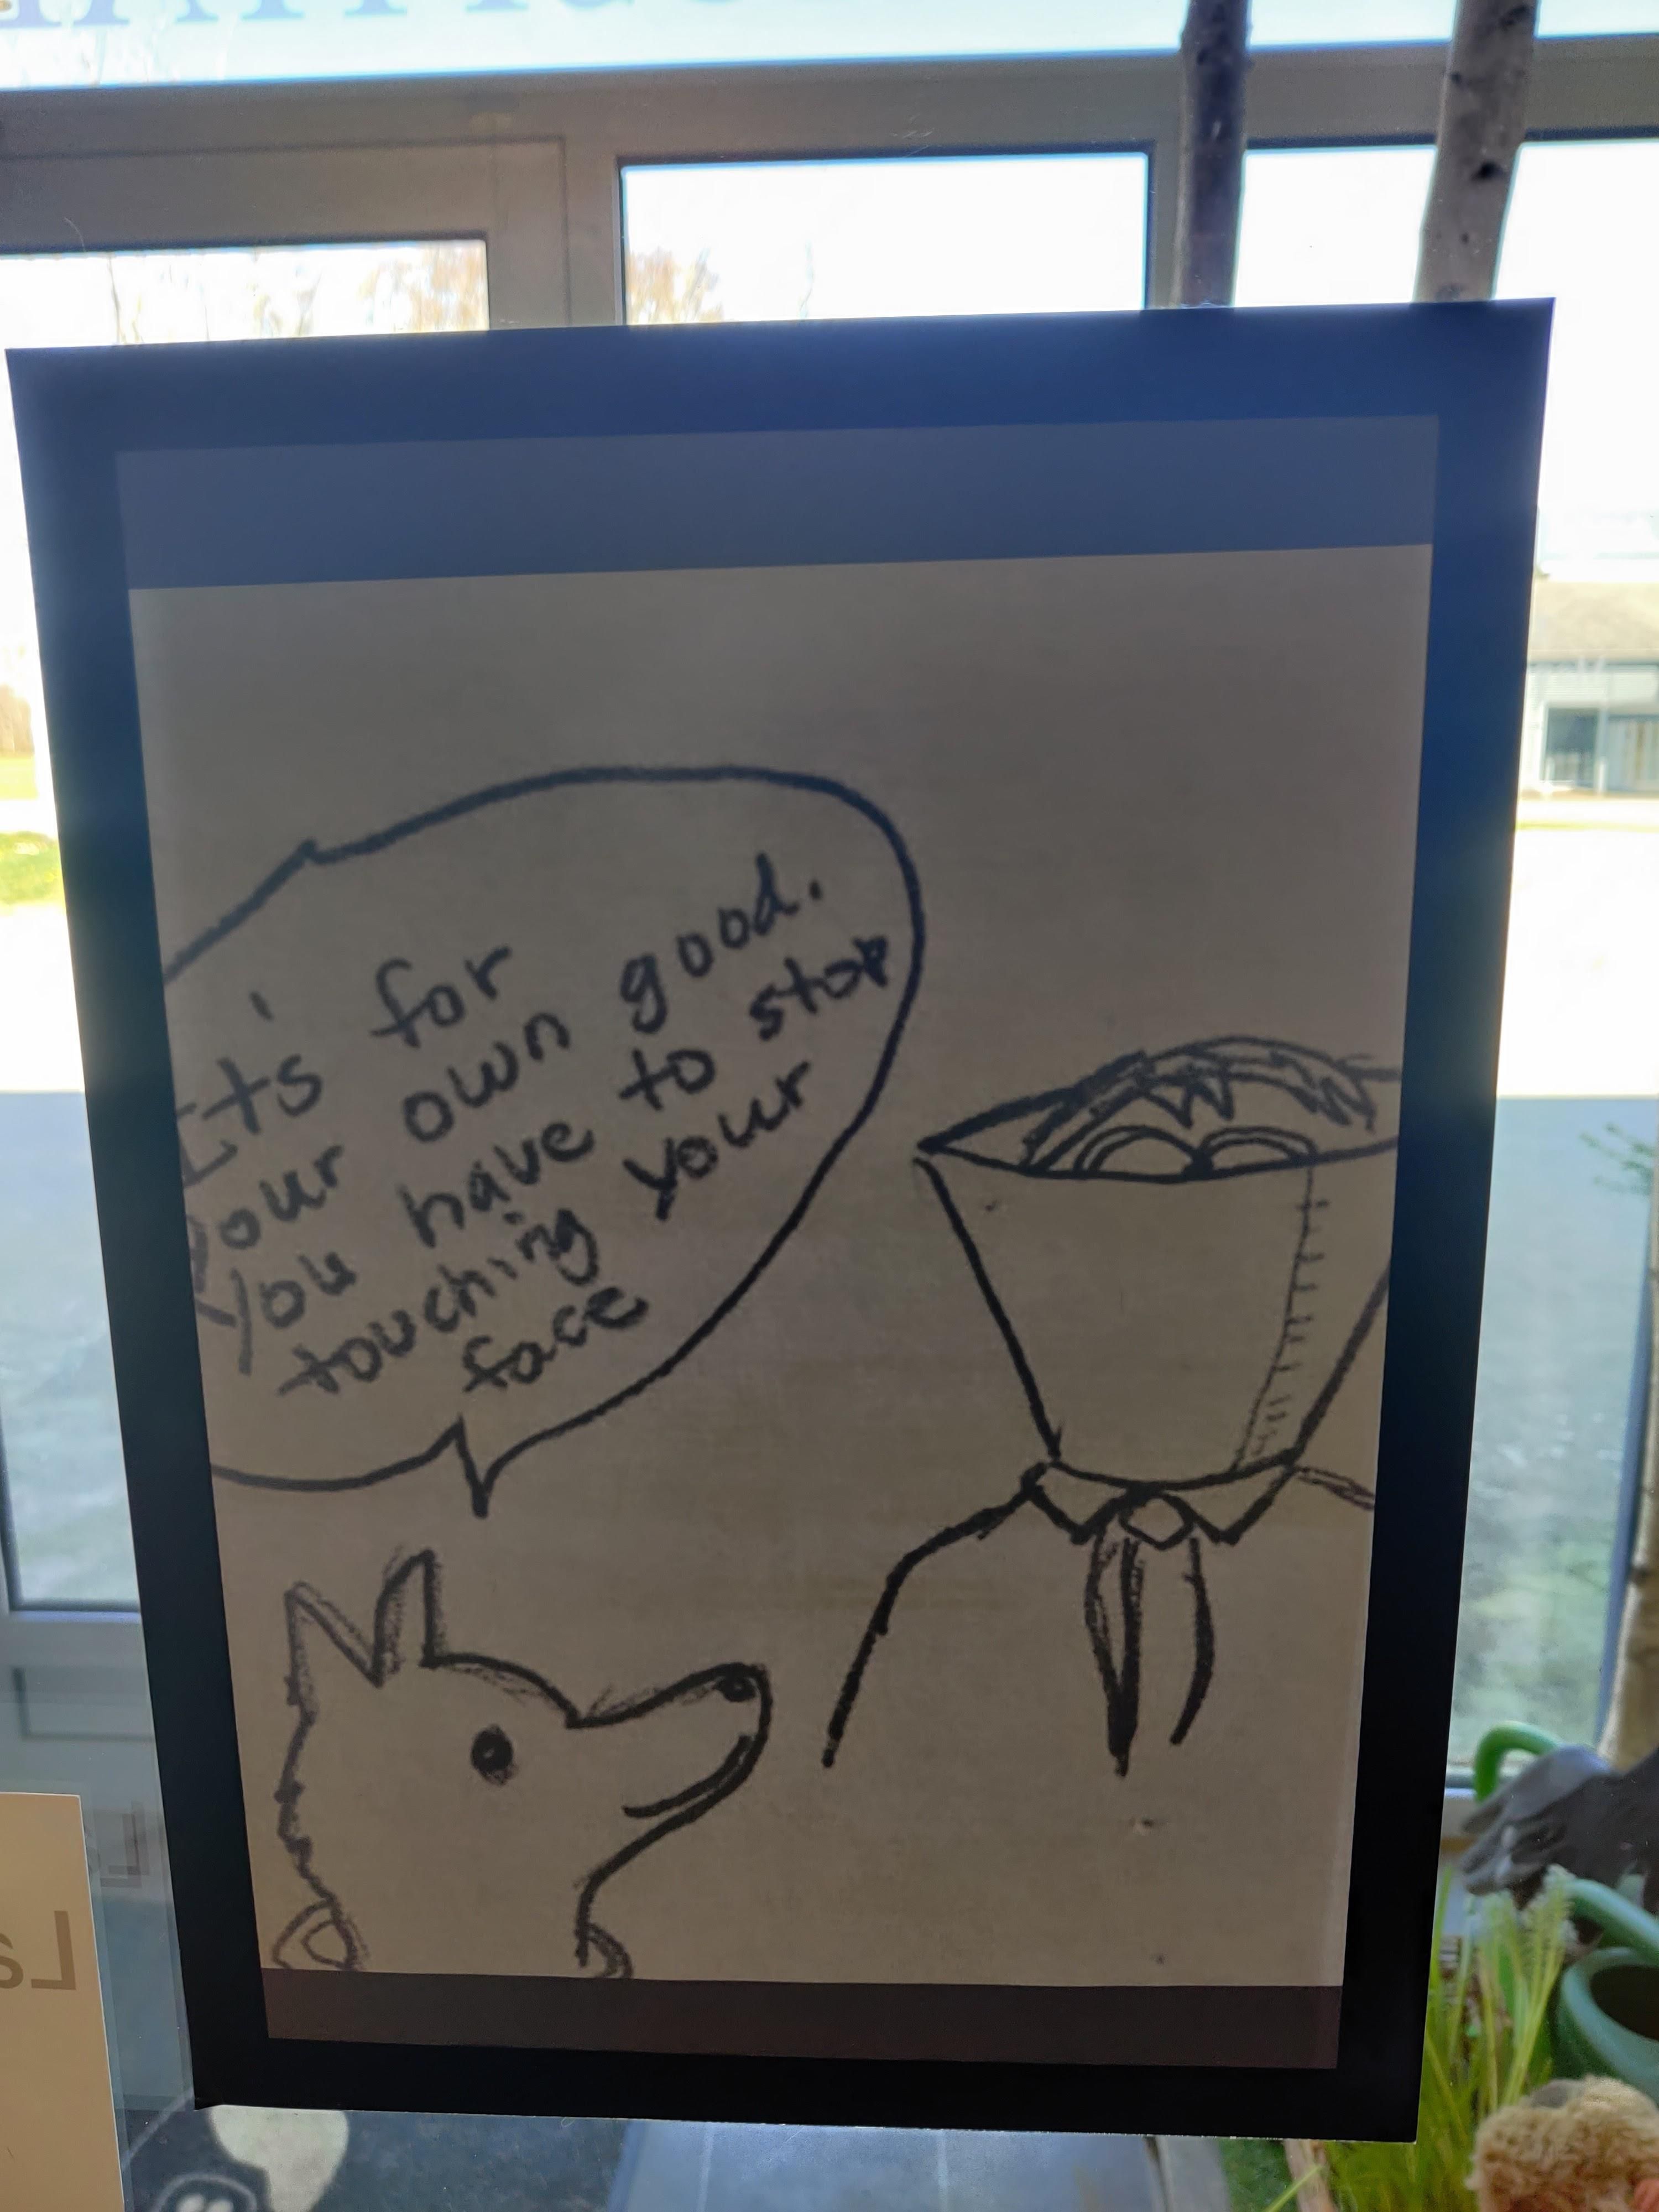 Saw this at the Dog Veterinarian today..